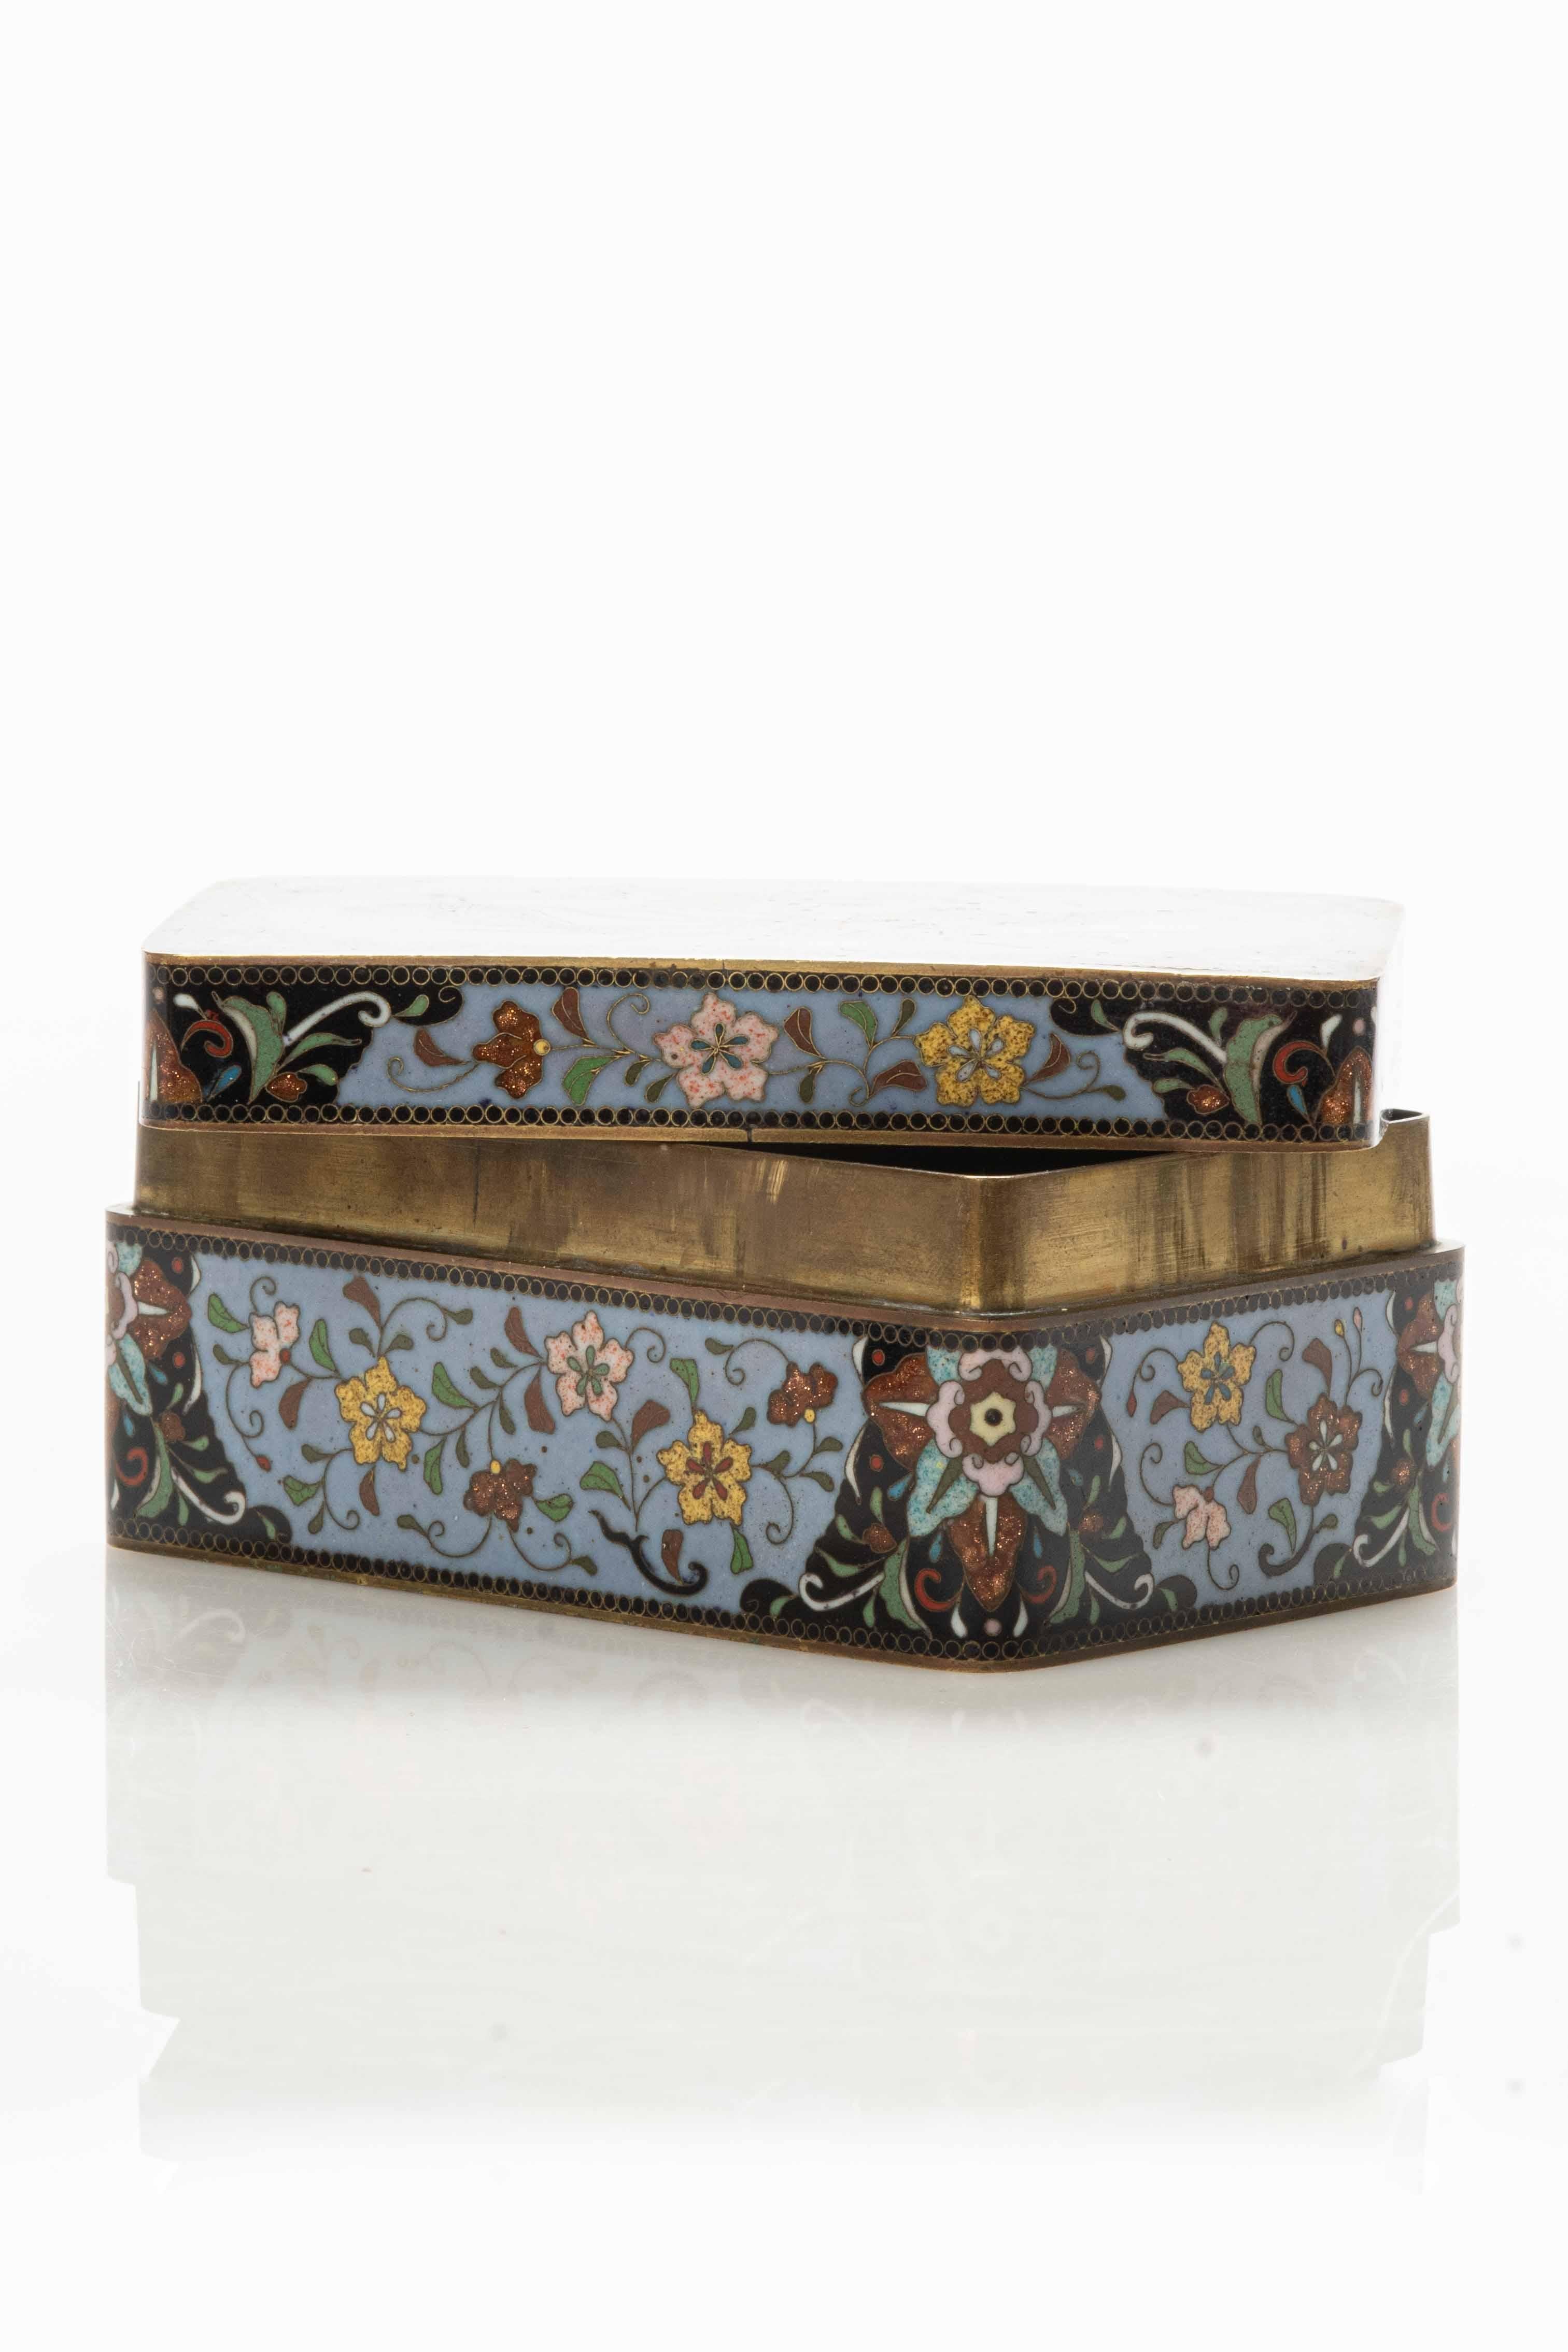 Kogo box in cloisonné, covered with polychrome enamels and aventurine stone, showing an elegant depiction of a phoenix in flight.

The aventurine stone, with its sparkling shades, further enriches the composition, adding a shimmering and precious